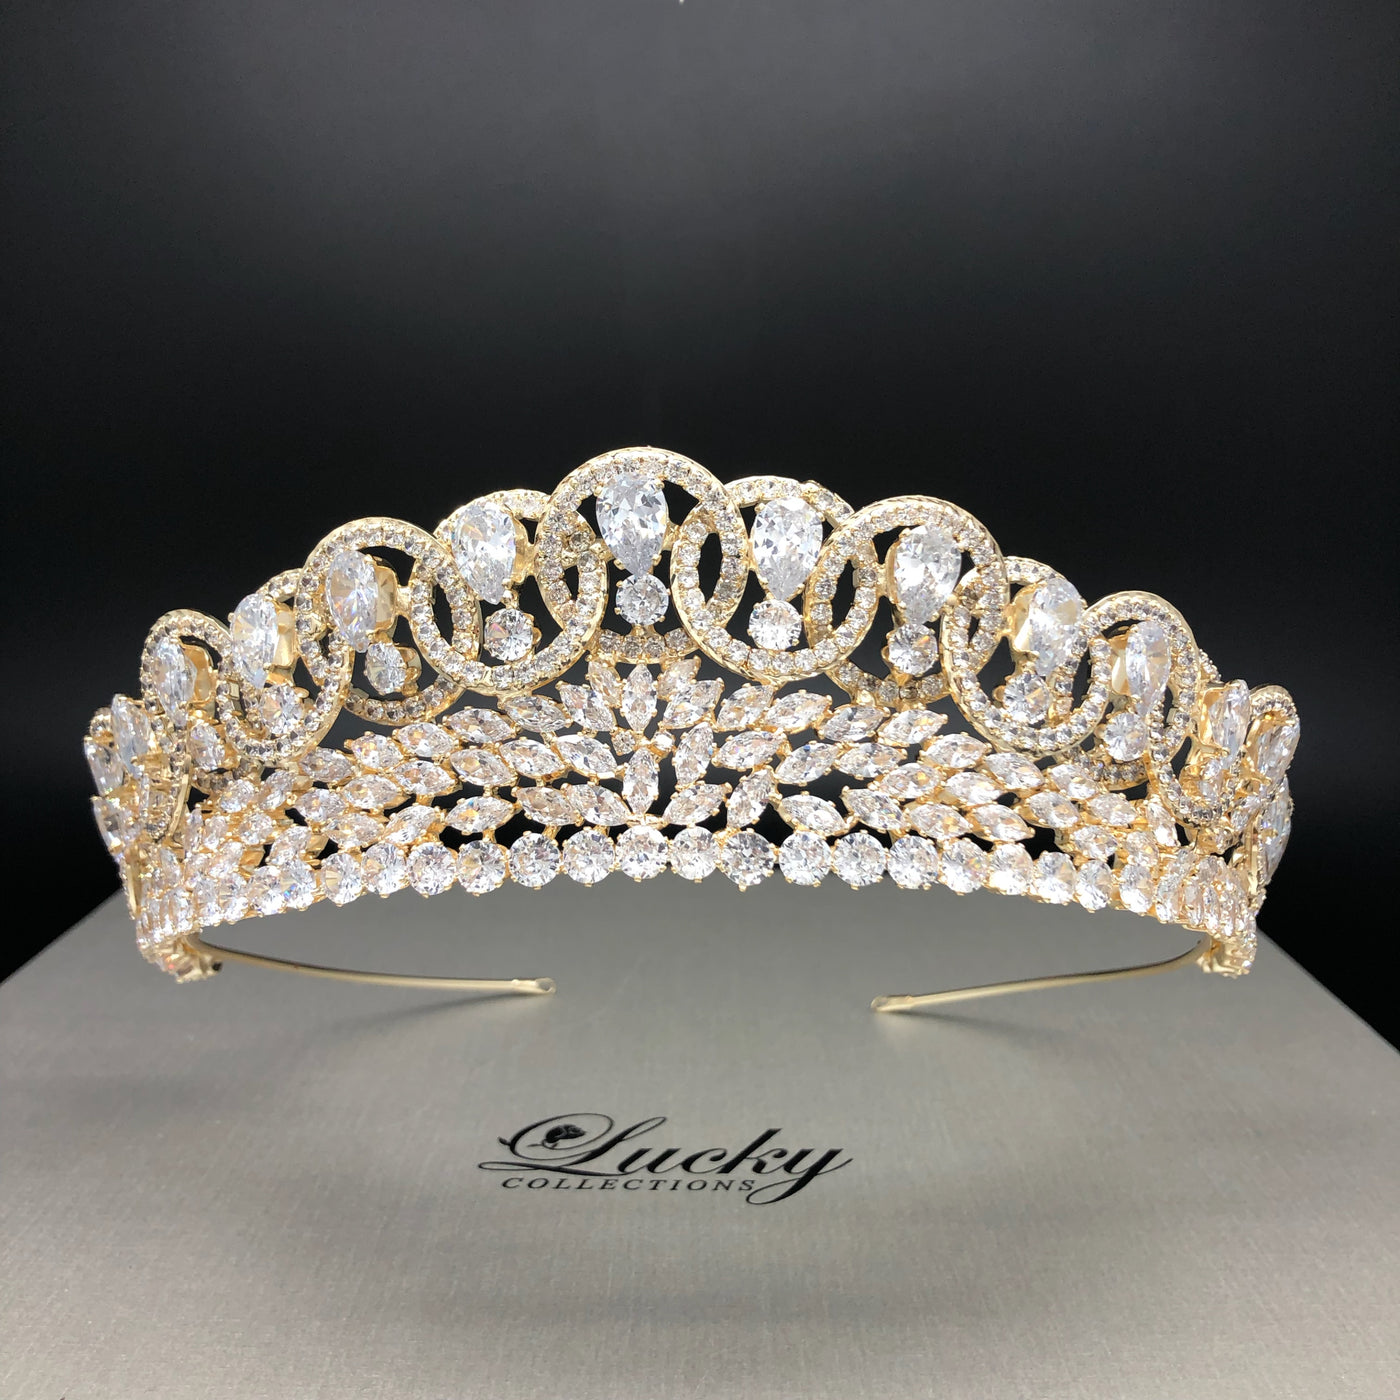 Zirconia Tiara, Magnificent Details by Lucky Collections ™